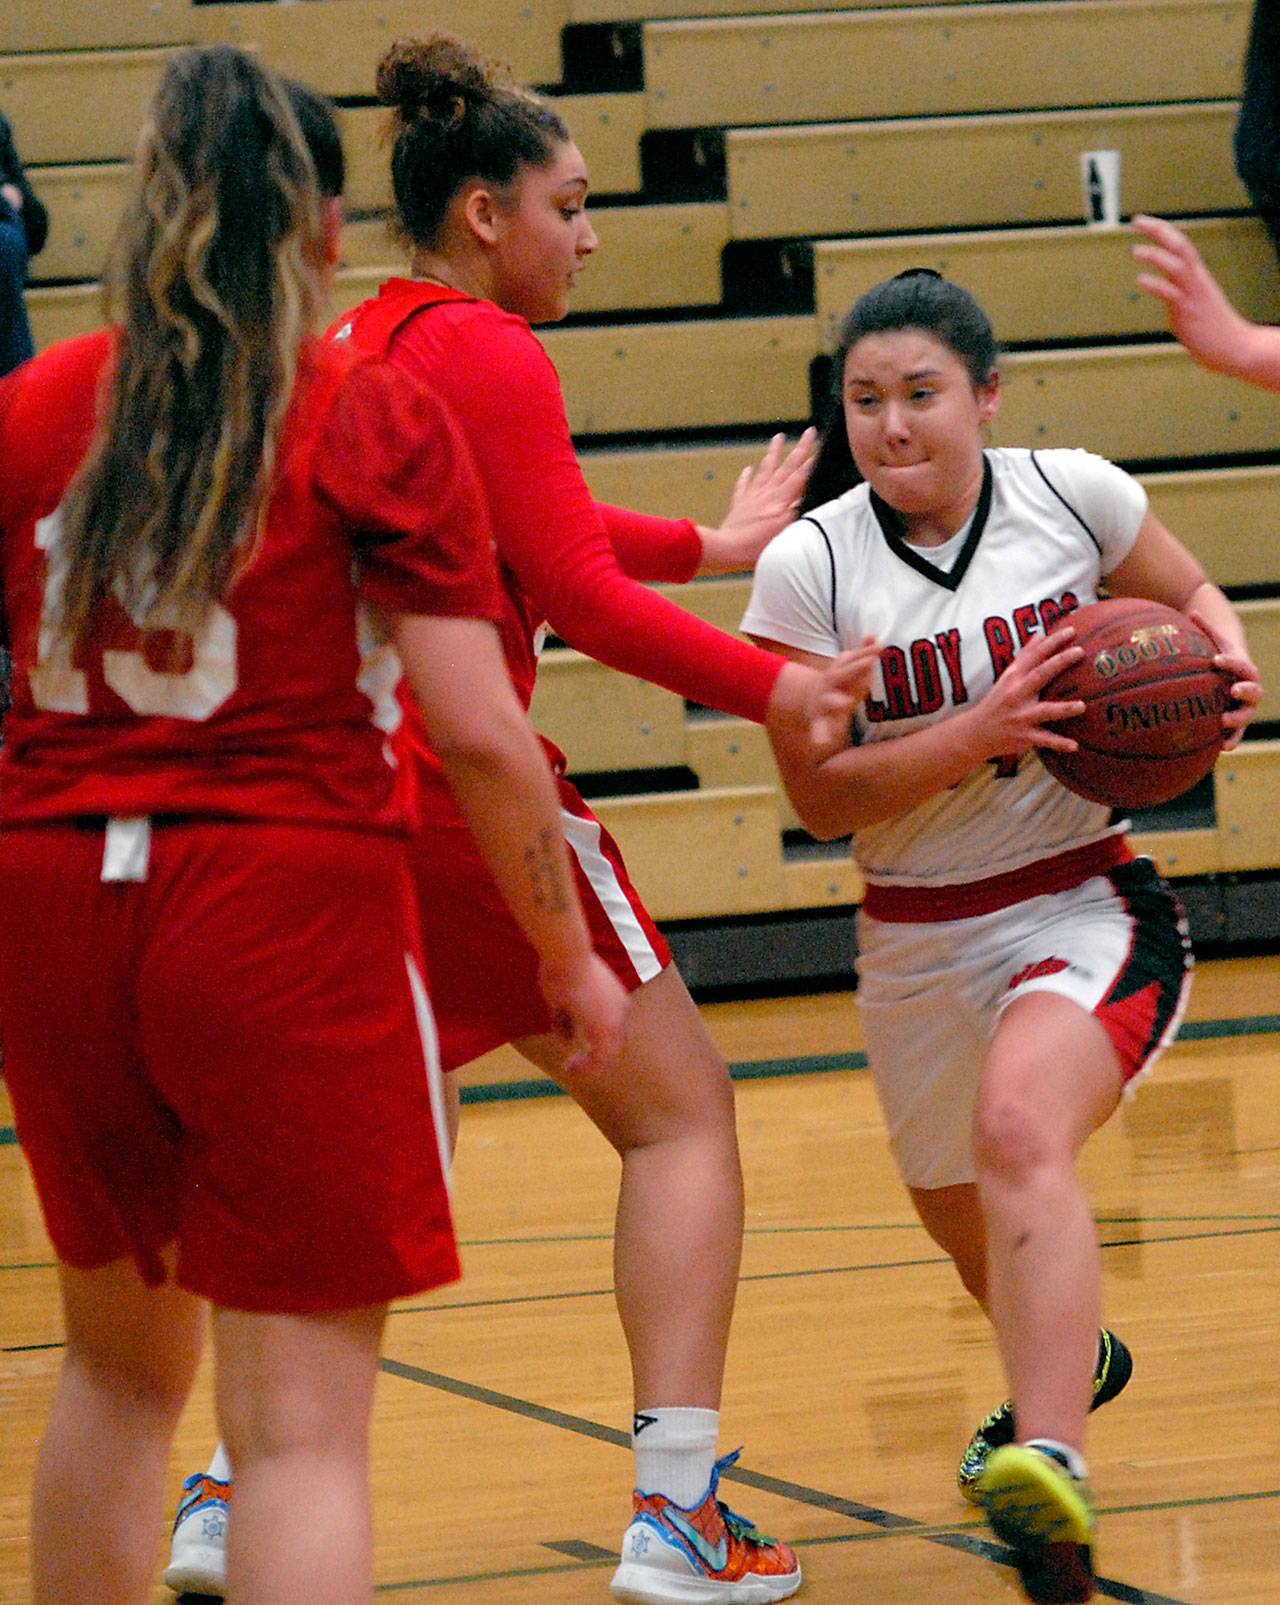 Neah Bay’s Ruth Moss, right, drives to the lane as Tulalip Heritage’s Claudia Parker, left, and Jacynta Mules-Gilford defend on Tuesday at Port Angeles High School. (Keith Thorpe/Peninsula Daily News)